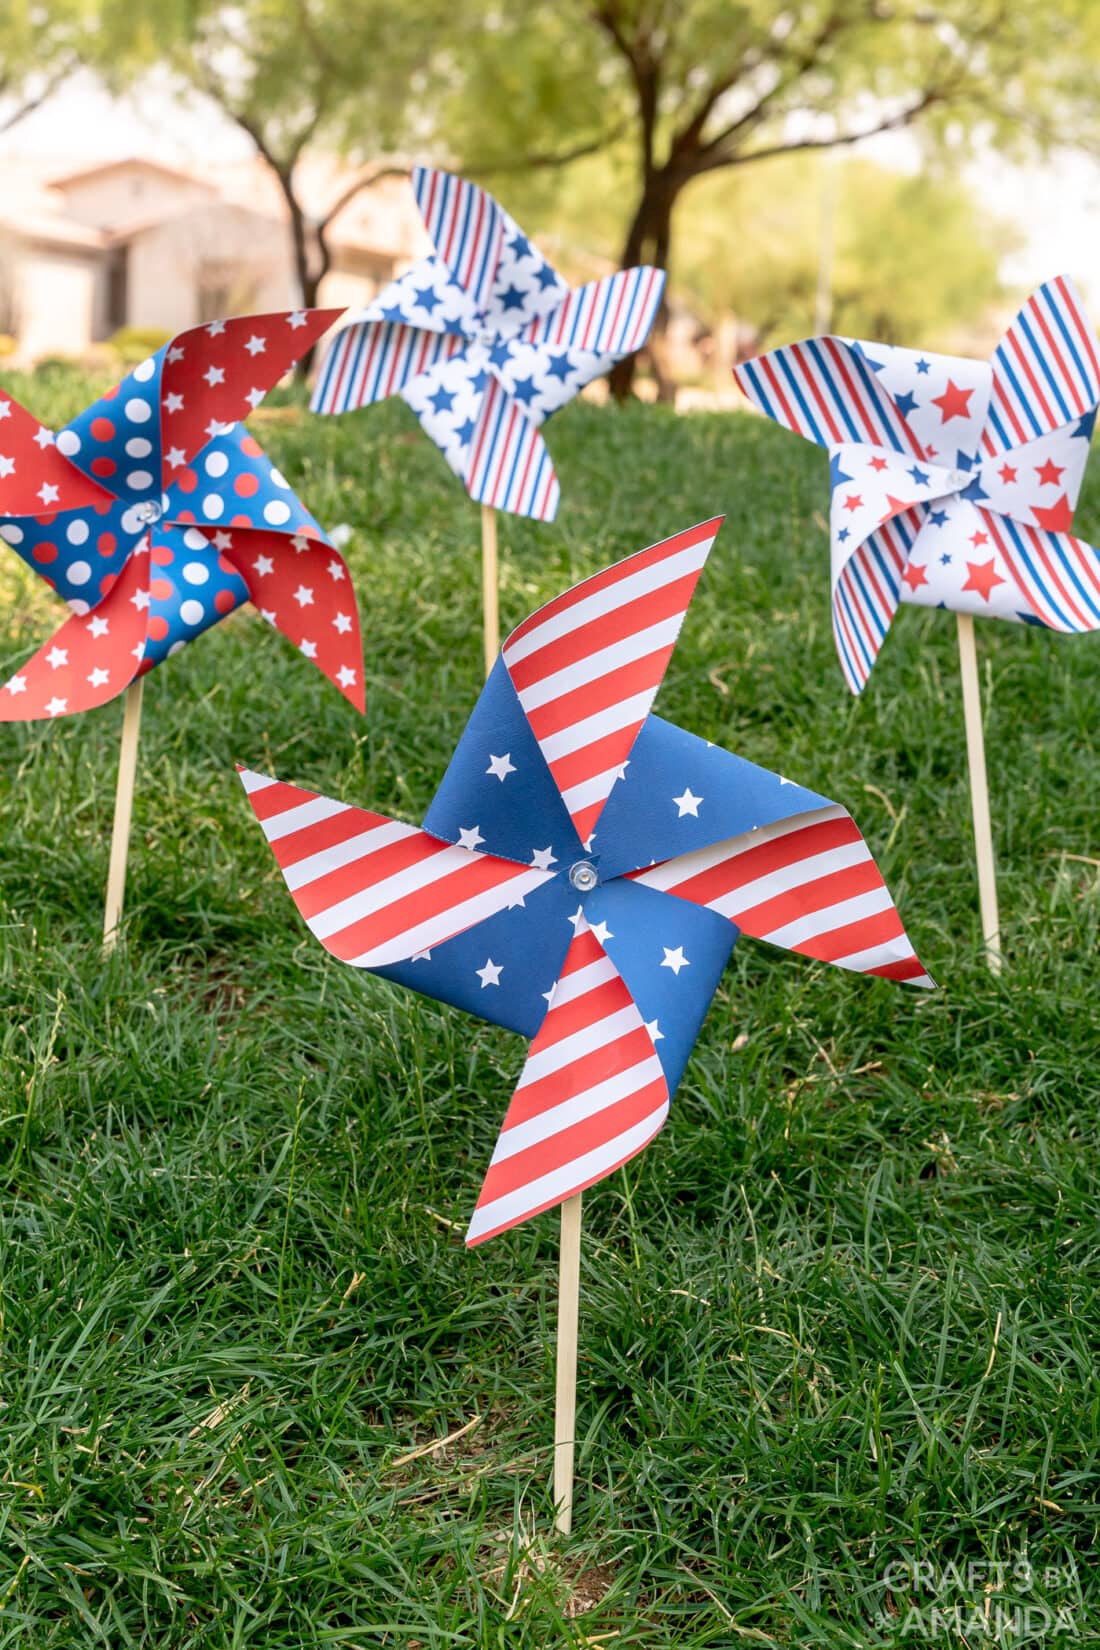 4th of July craft ideas that are easy to make